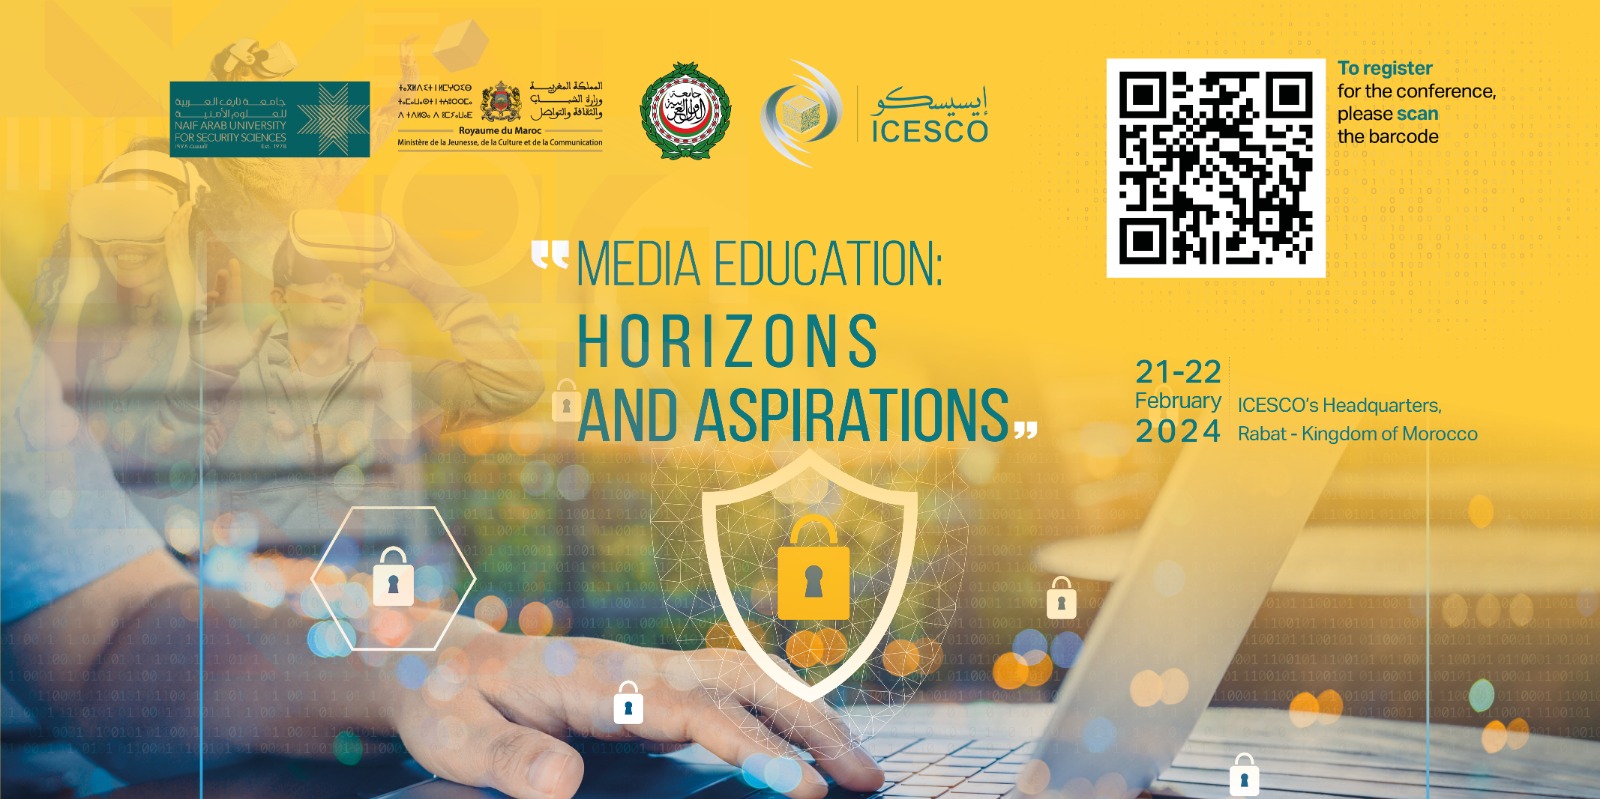 Next week, ICESCO and Naif Arab University for Security Sciences Hold an International Symposium on Media Education